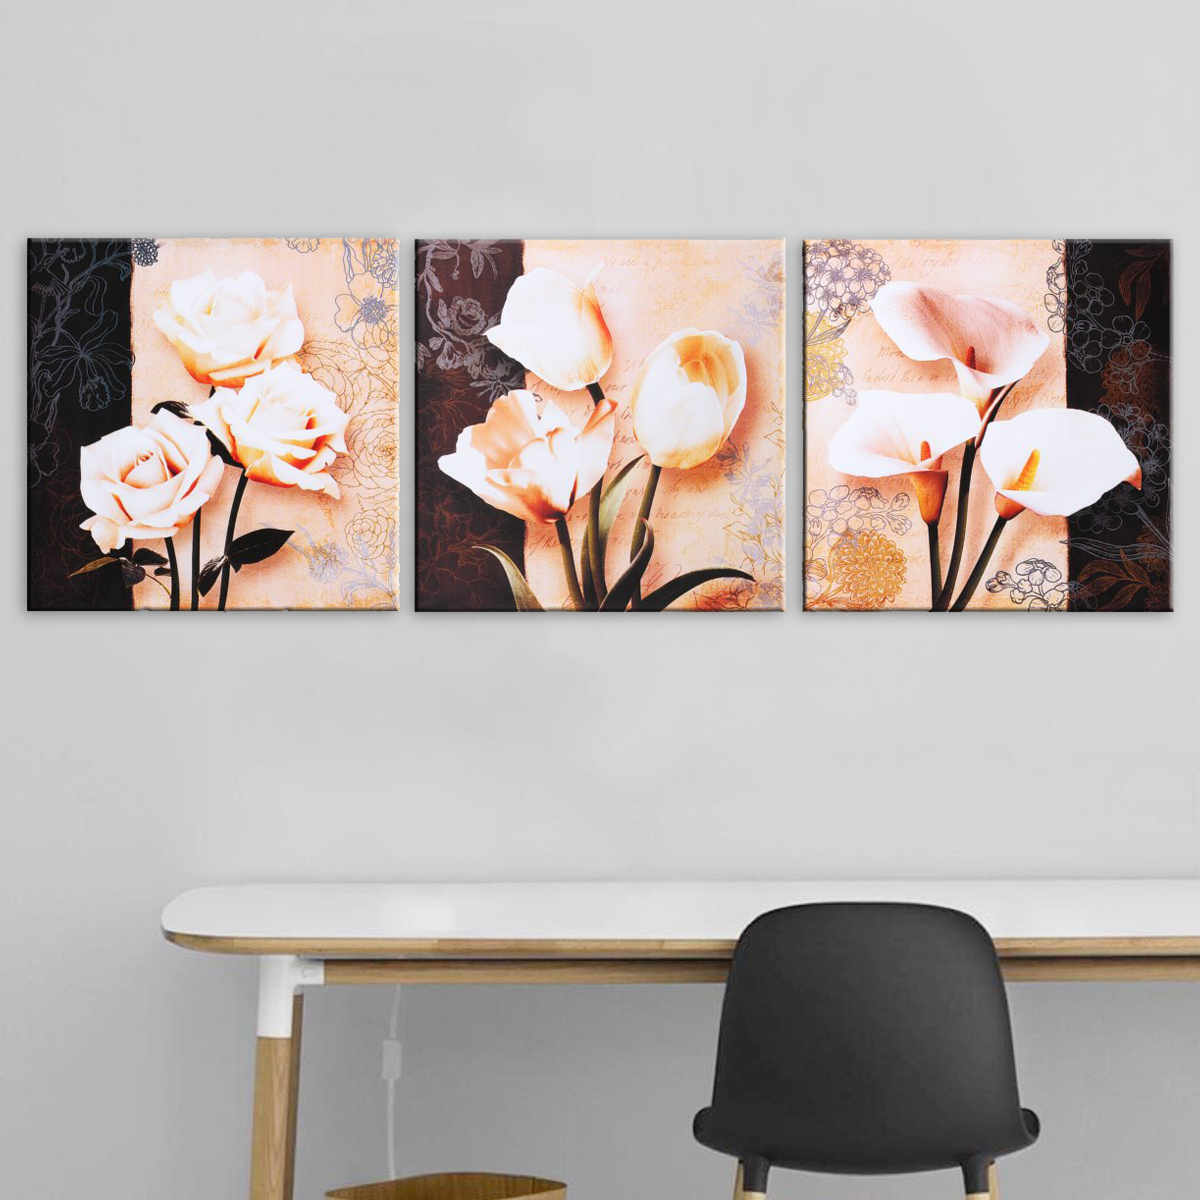 

3 Pcs Unframed Canvas Print Paintings Flower Picture Home Bedroom Wall Sticker Art Decor